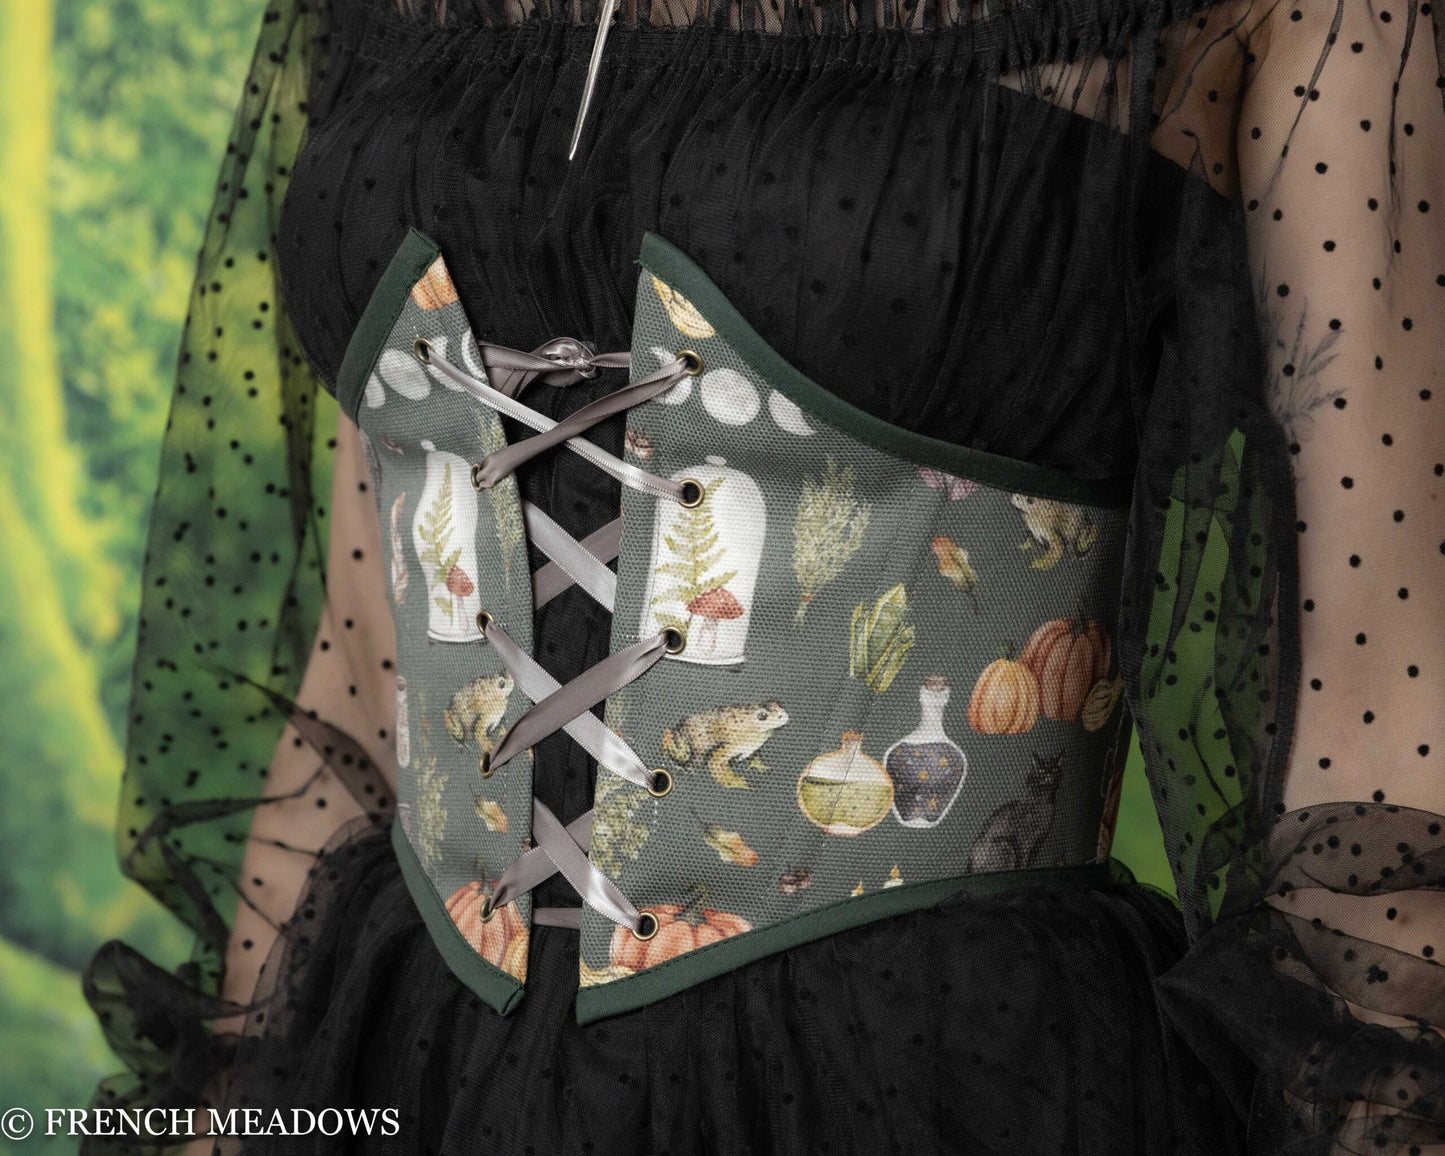 Teal Witchy Corset Belt – French Meadows